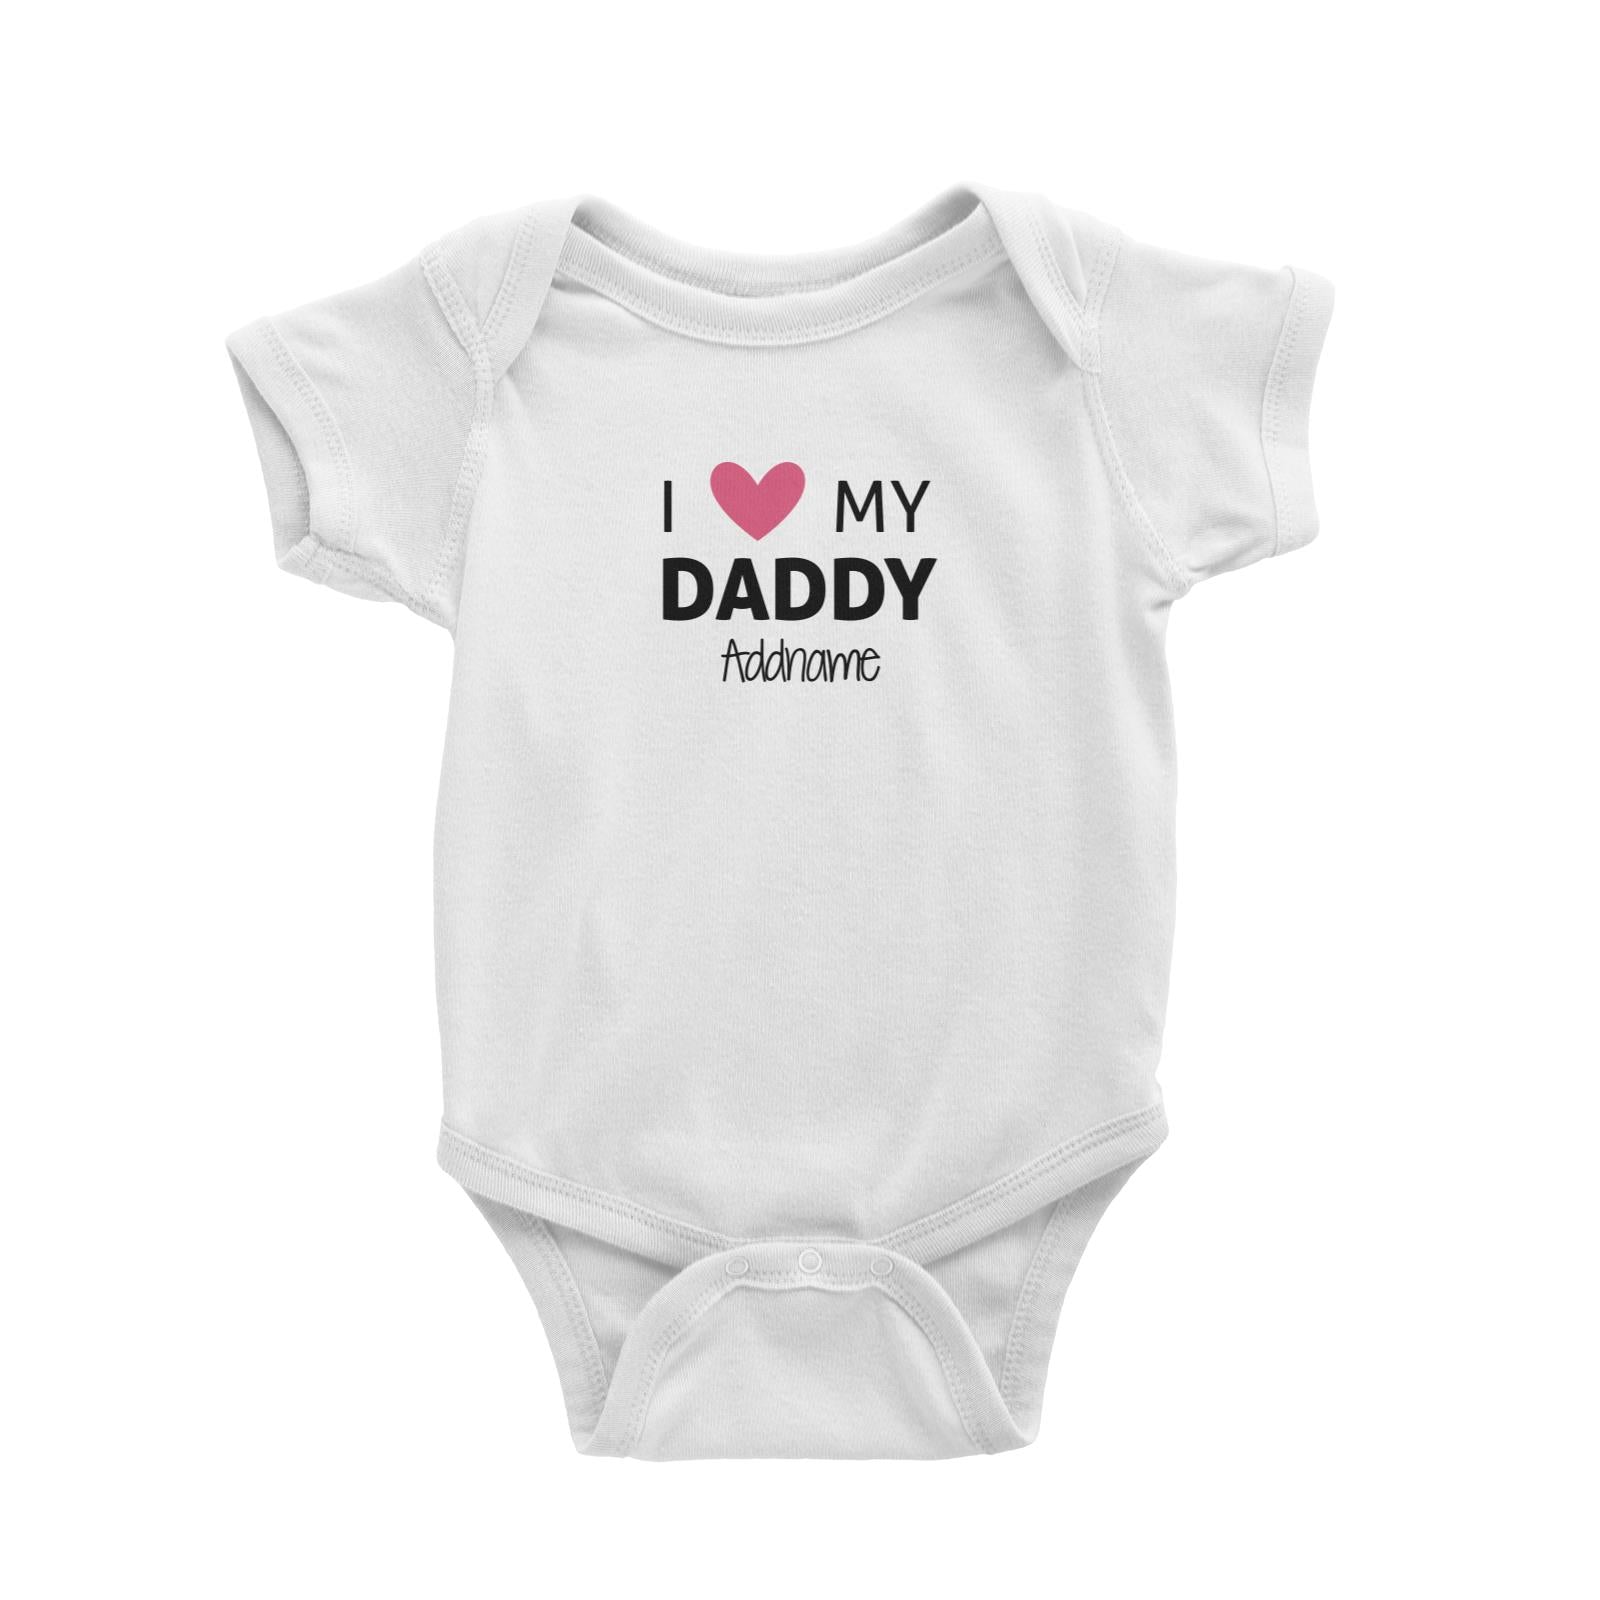 I Love My Daddy Addname Baby Romper